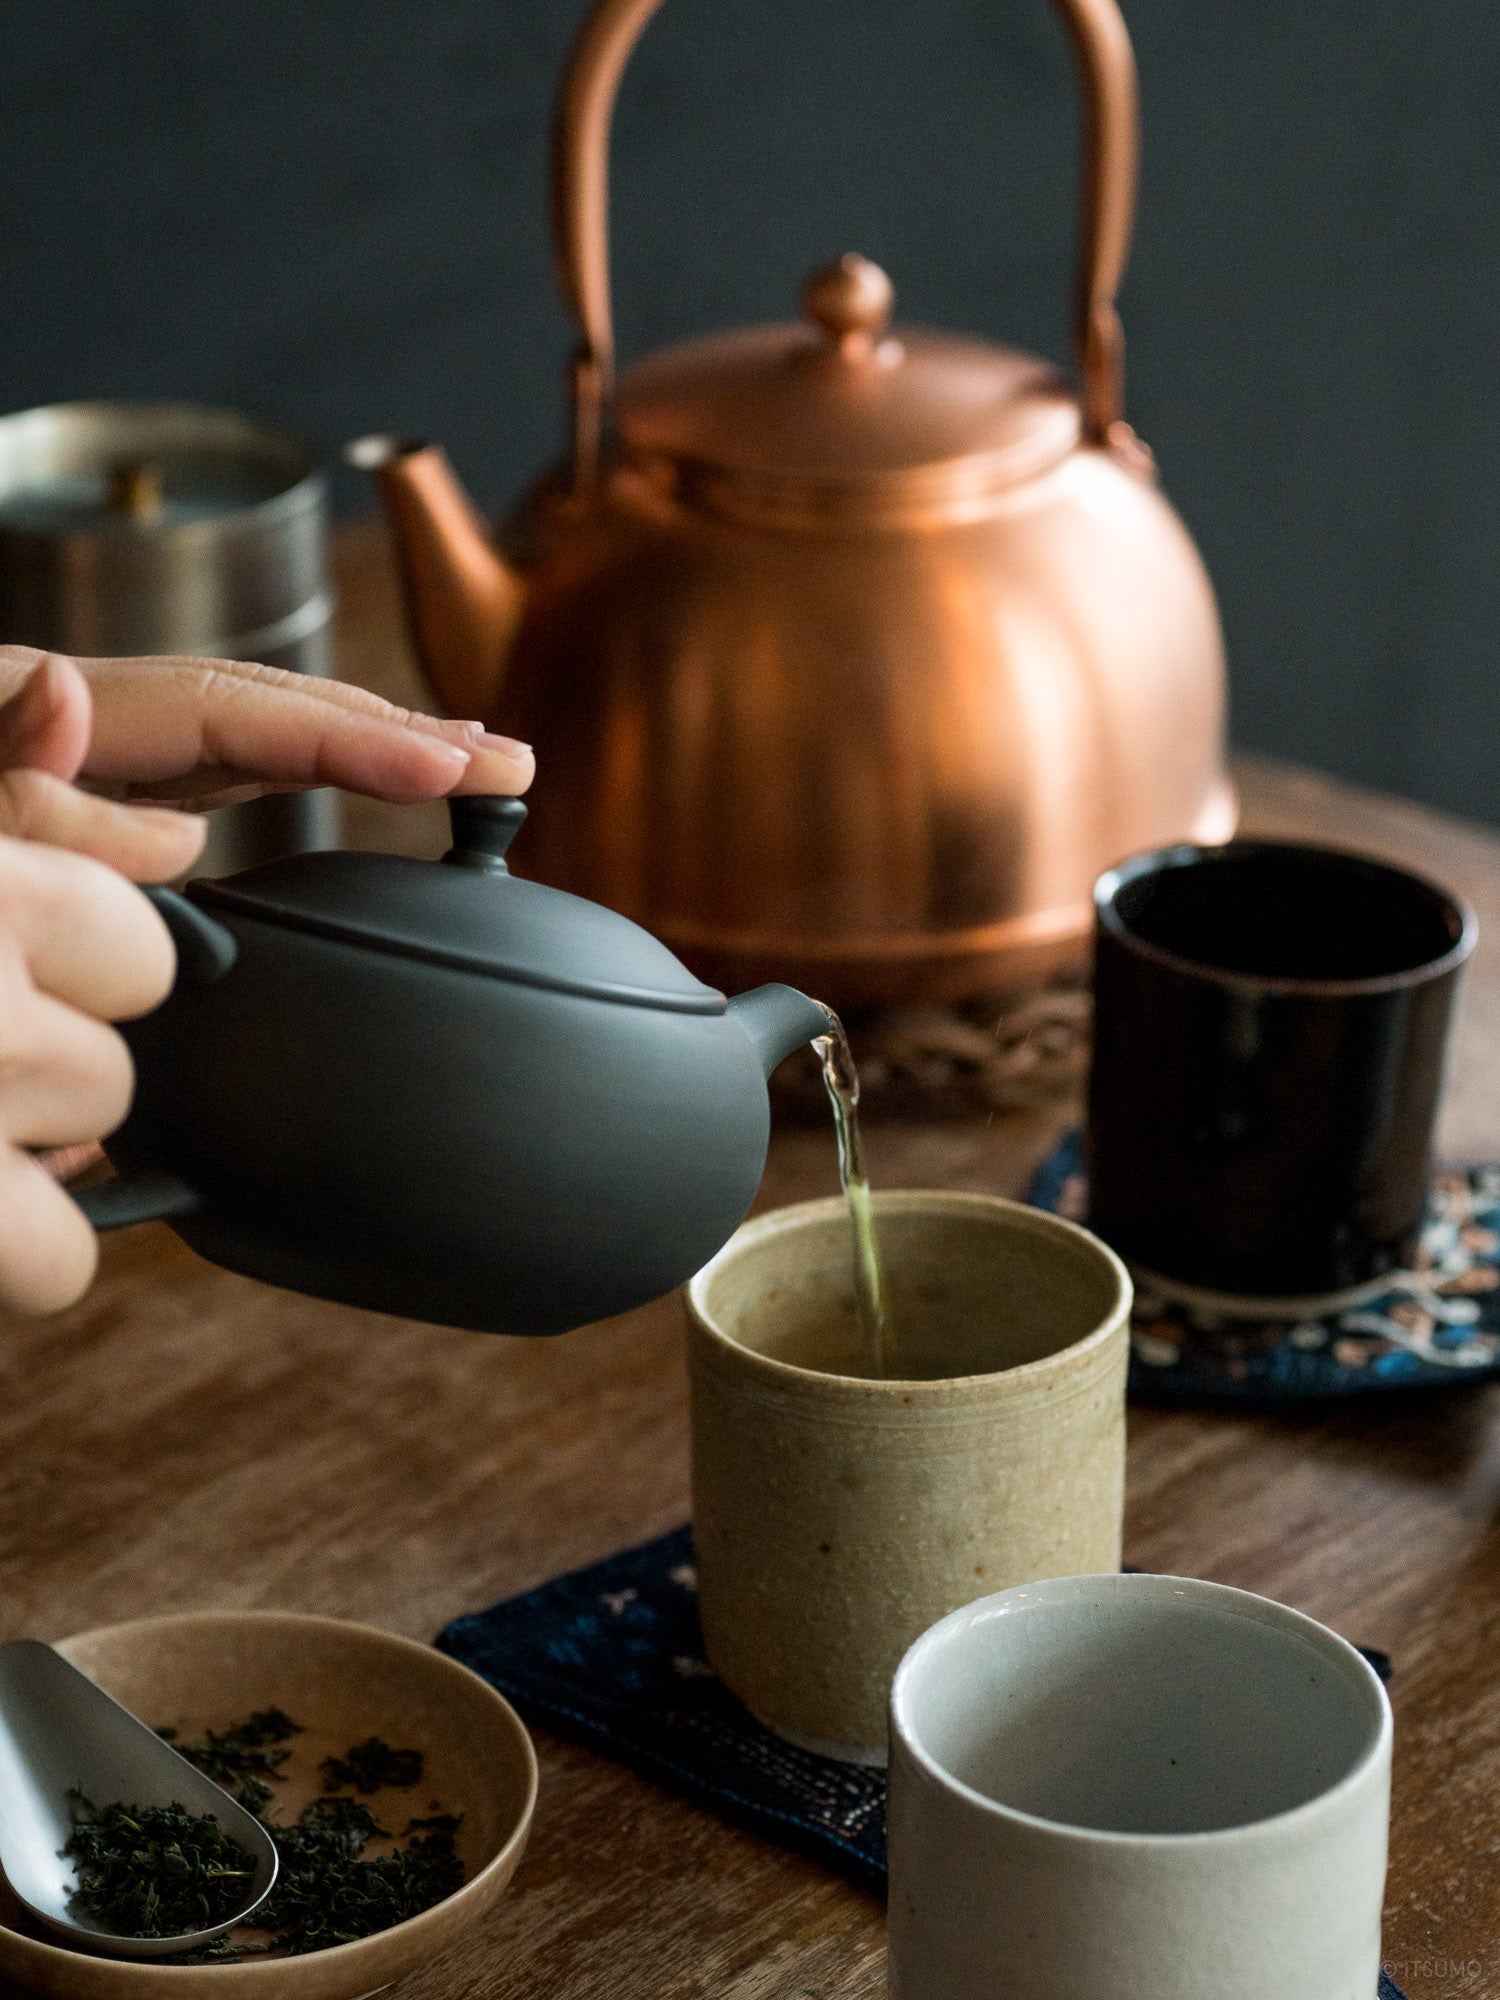 Azmaya ceramic oval black teapot pouring tea into ceramic cups with copper kettle in the background